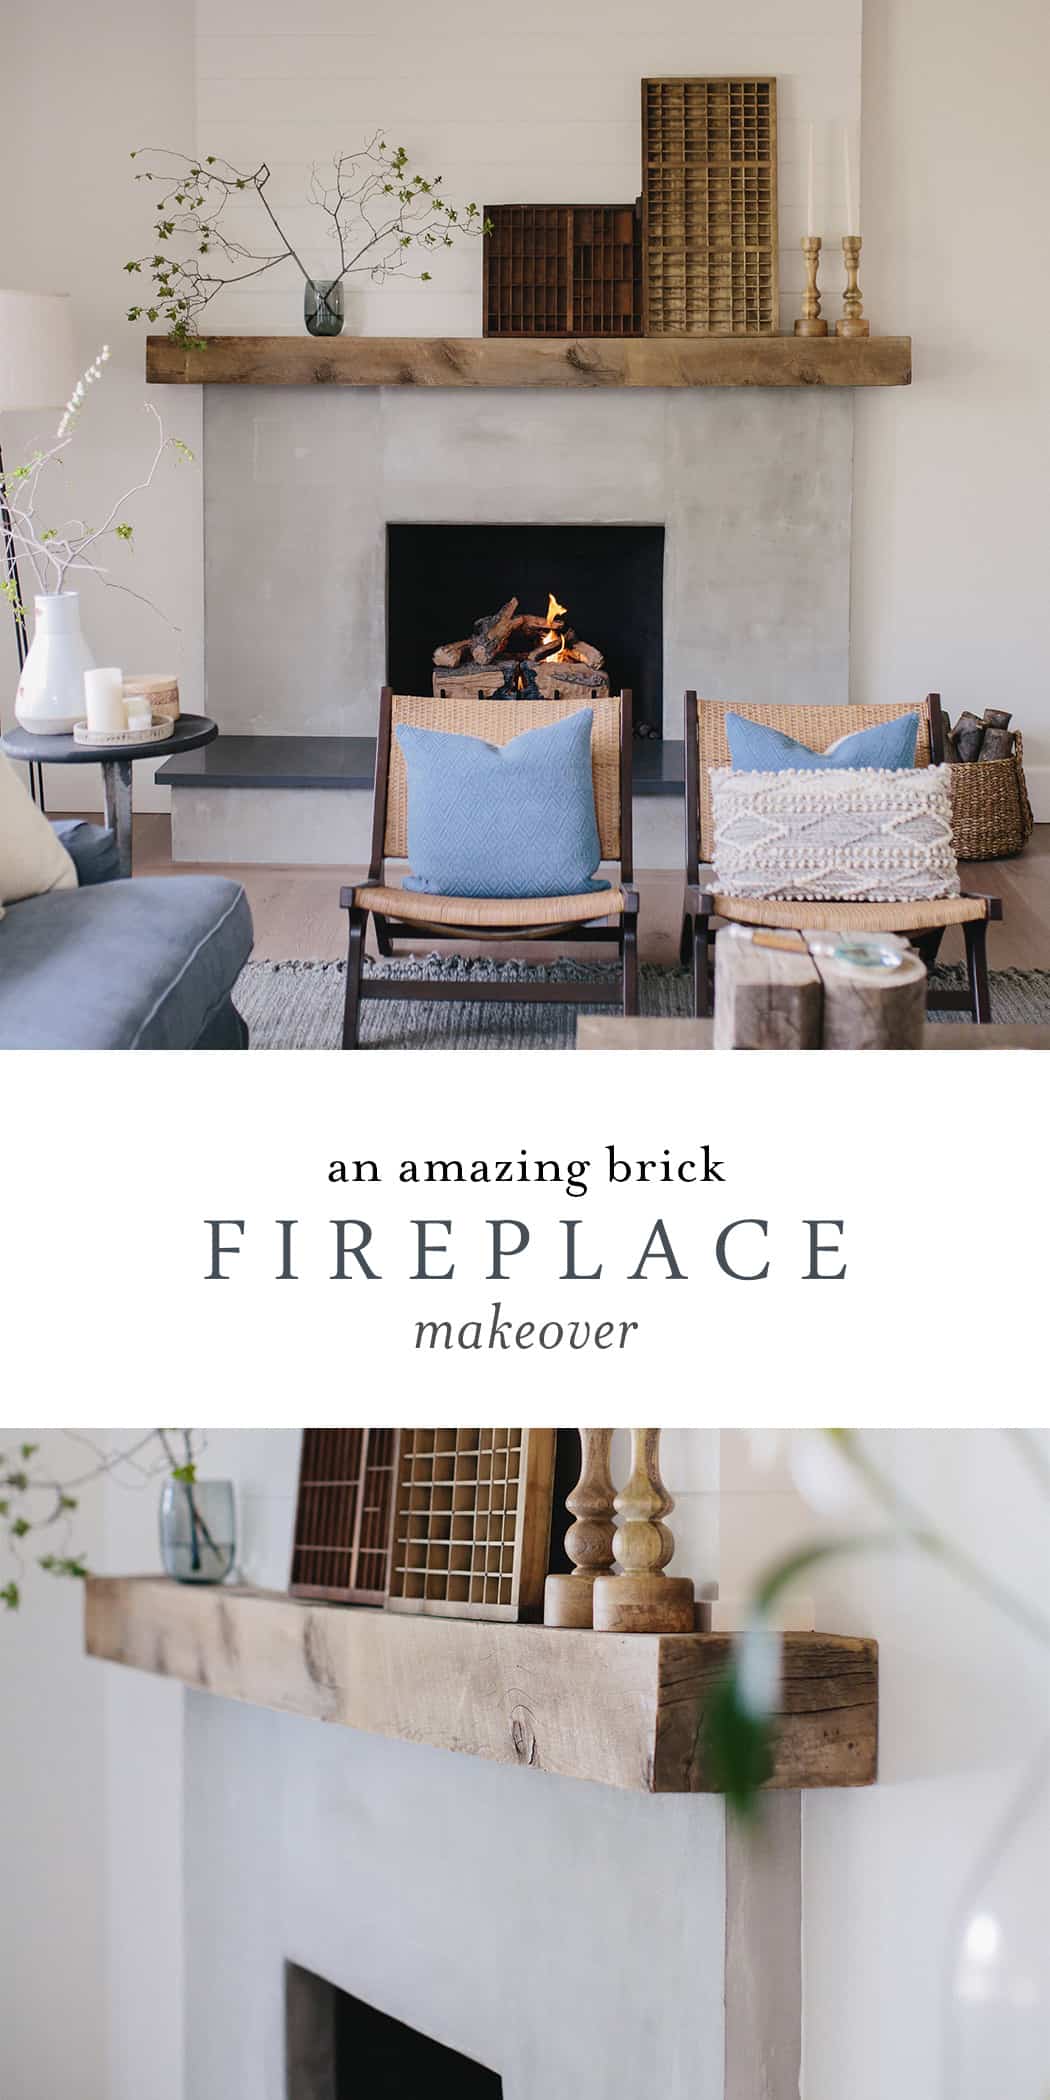 Brick Fireplace Update Using Cement And, How To Change The Look Of A Brick Fireplace